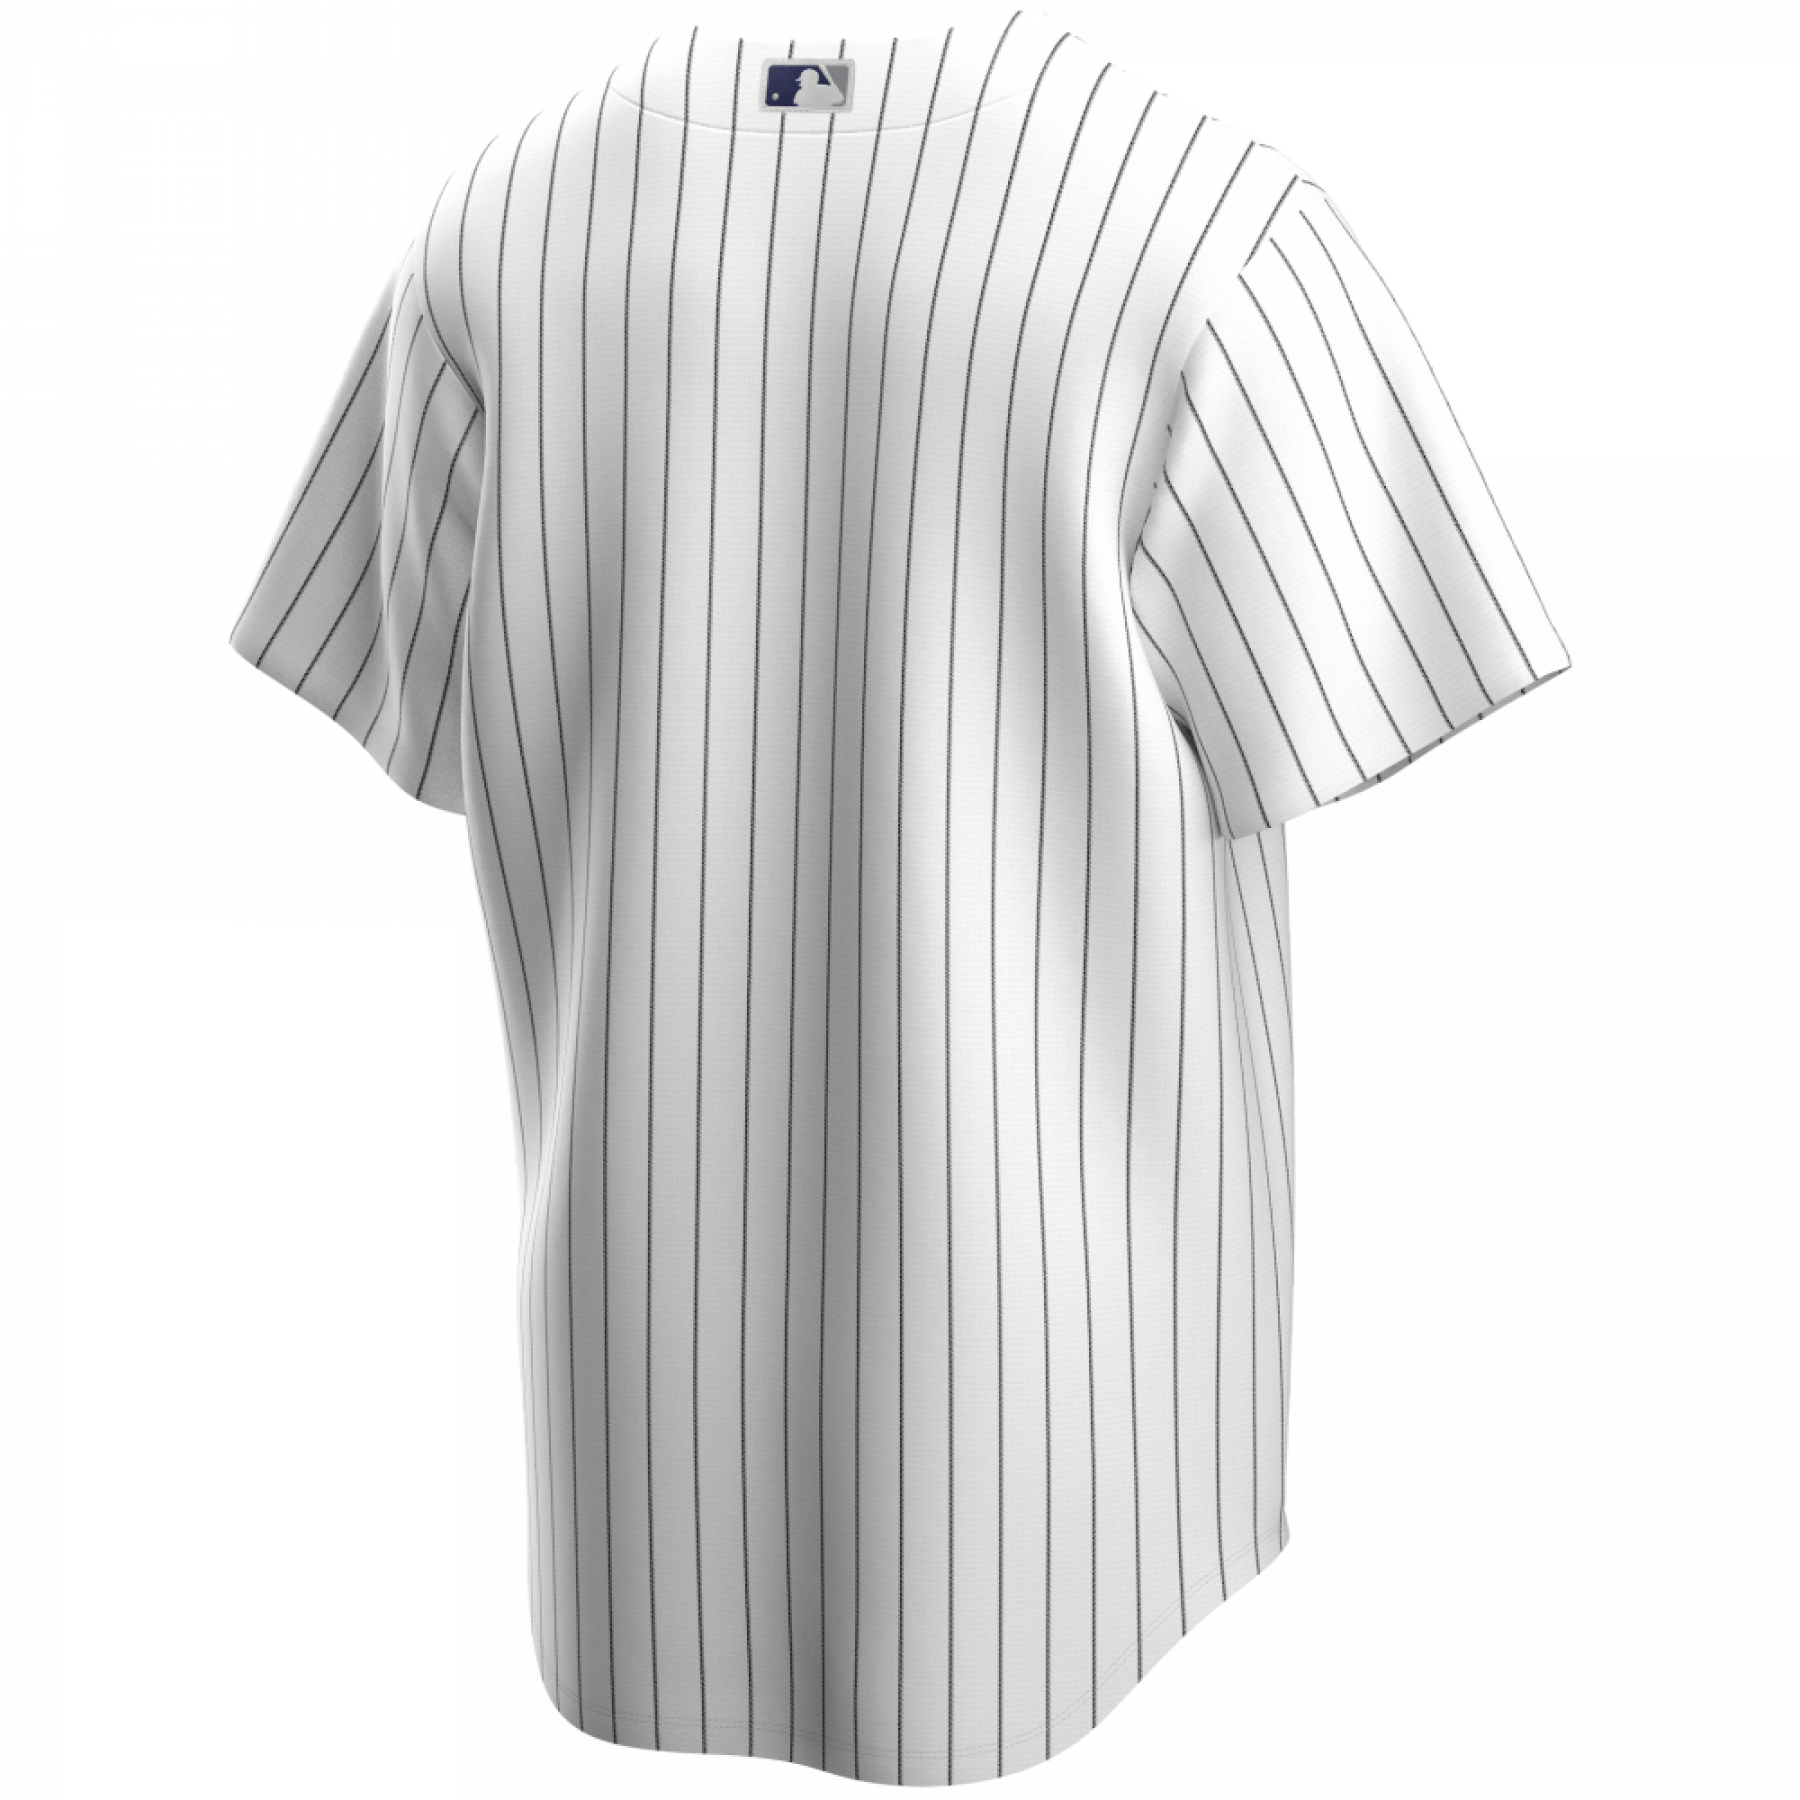 Camisola Official Replica New York Yankees